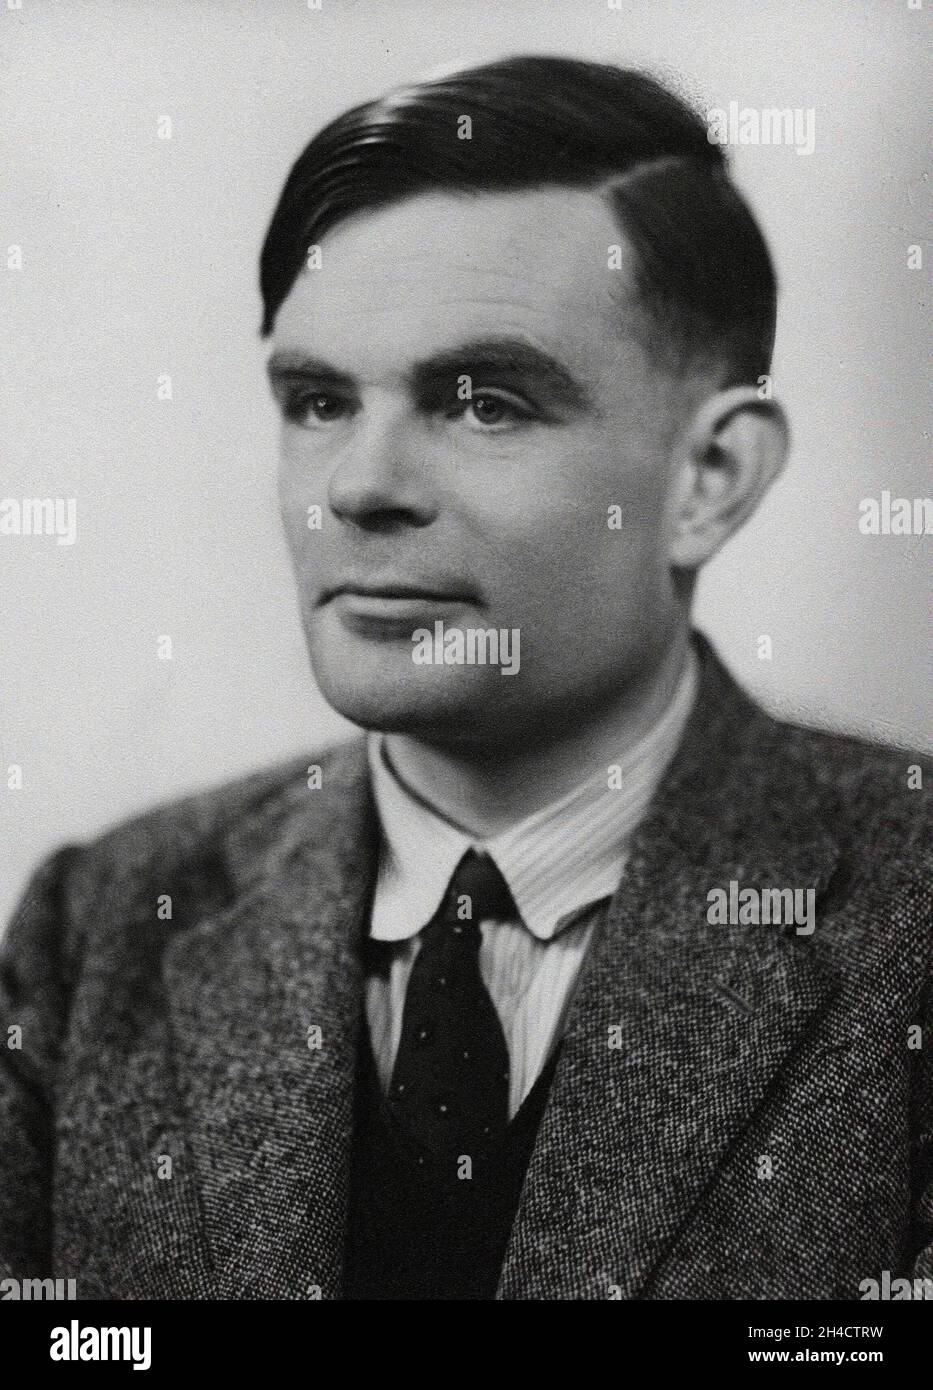 LONDON, UK - 1951 - Portrait of the famous early computer inventor and war hero Alan Mathison Turing ( 23 June 1912 – 7 June 1954 ). His work at Bletc Stock Photo